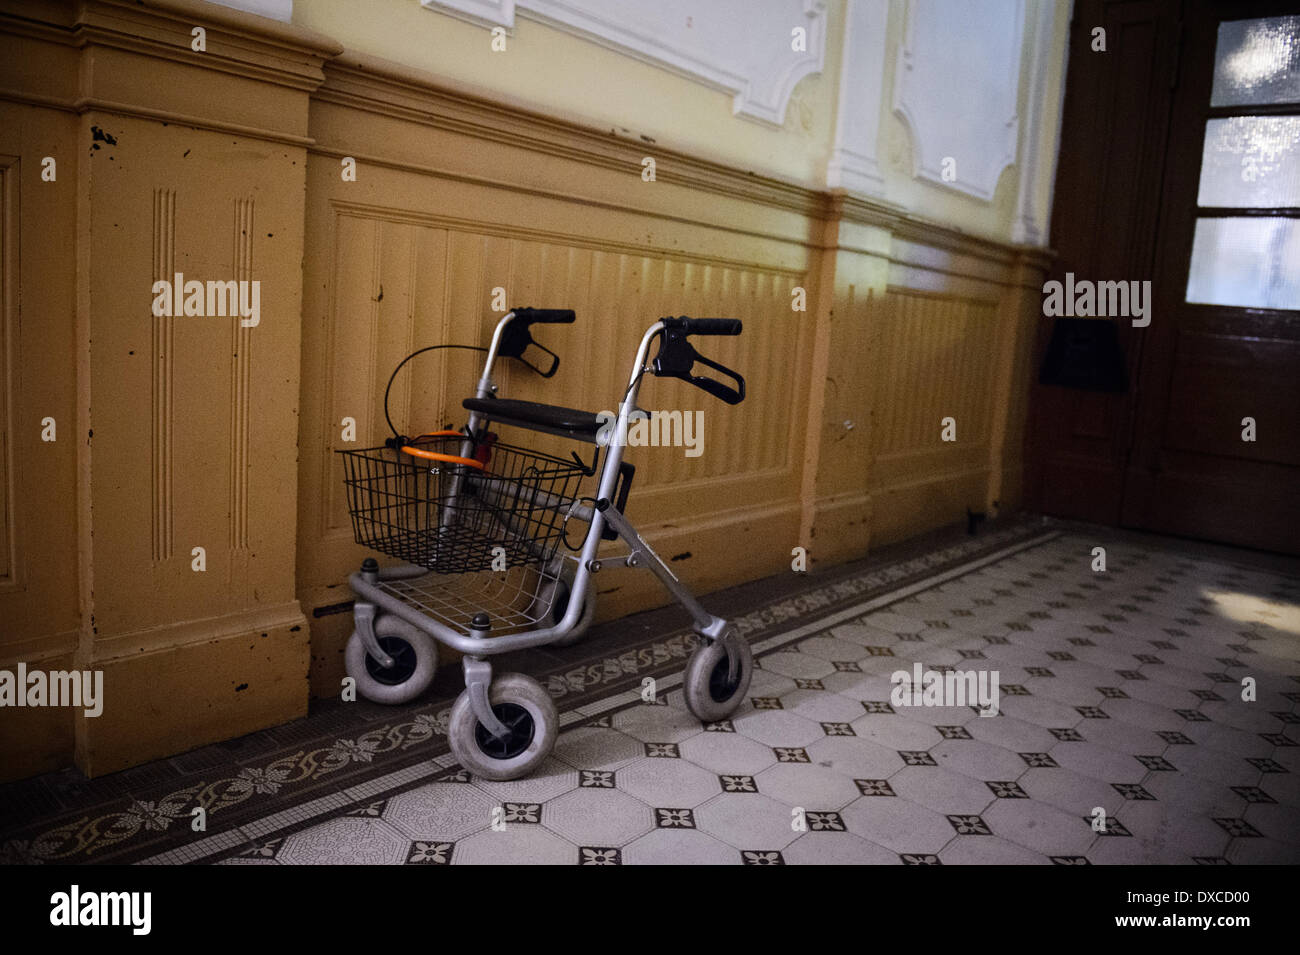 Leipzig, Germany. 20th Mar, 2014. A rollator (walking aid/walker) stands in a building on March 20, 2014 in Leipzig, Germany. © dpa/Alamy Live News Stock Photo